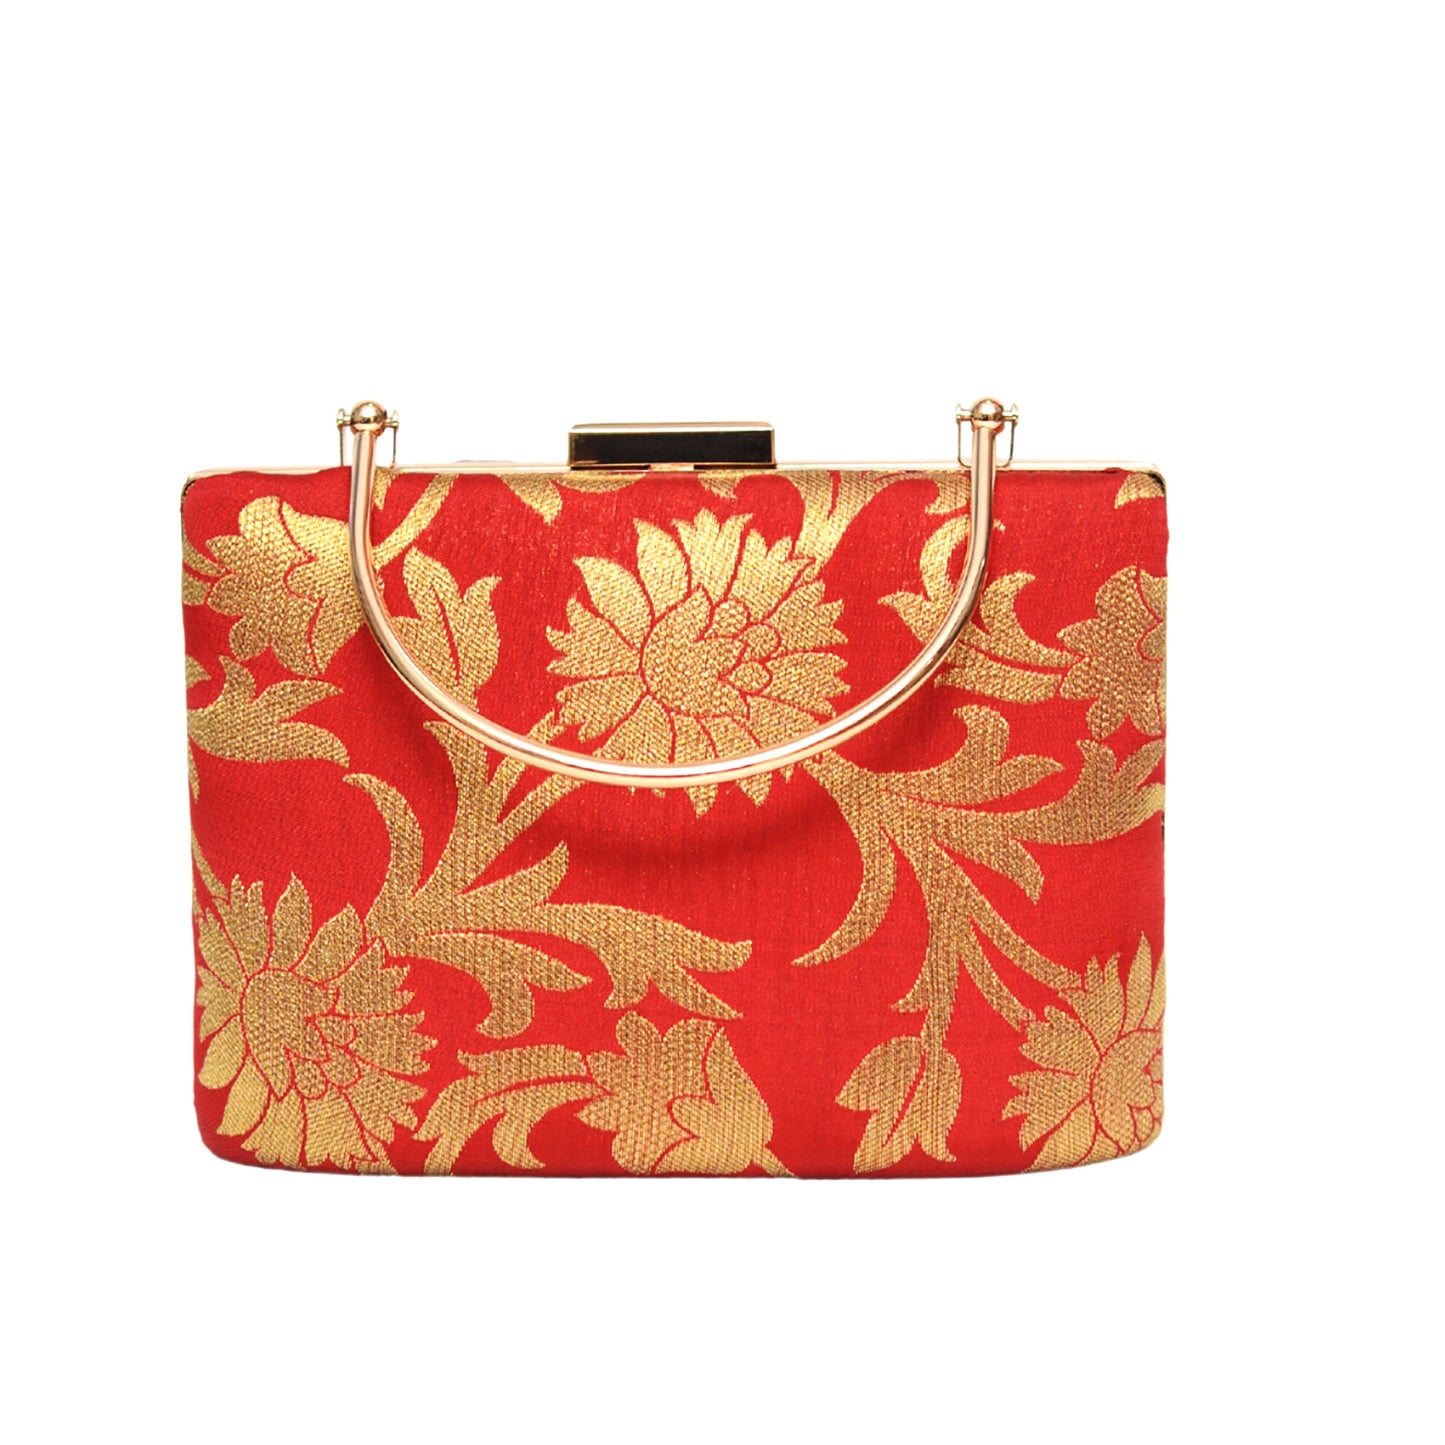 Red Floral Embroidered Clutch